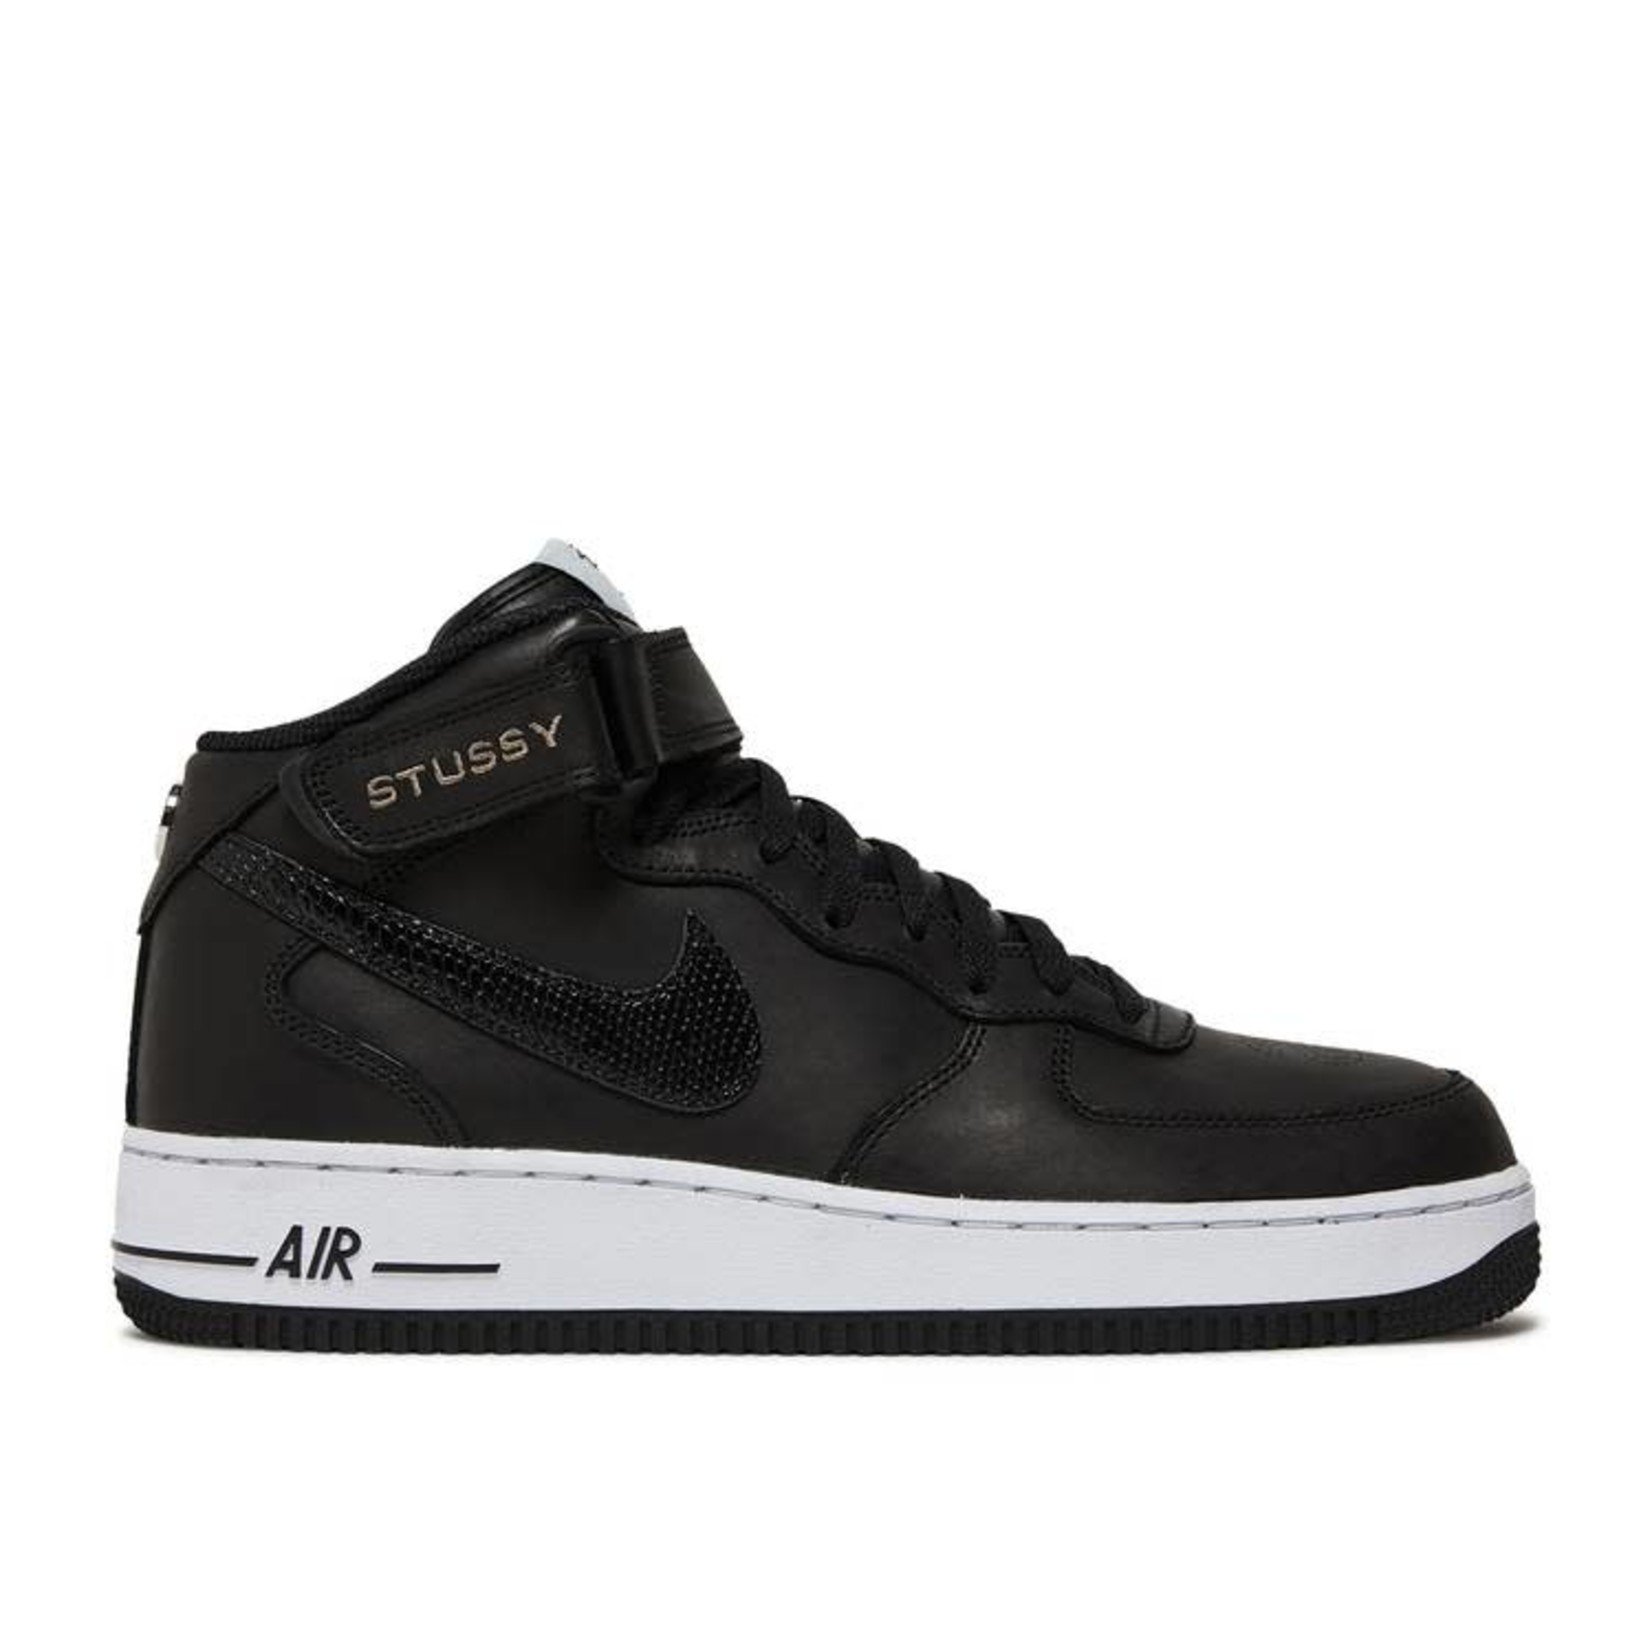 Nike Nike Air Force 1 Mid Stussy Black White Size 12, DS BRAND NEW